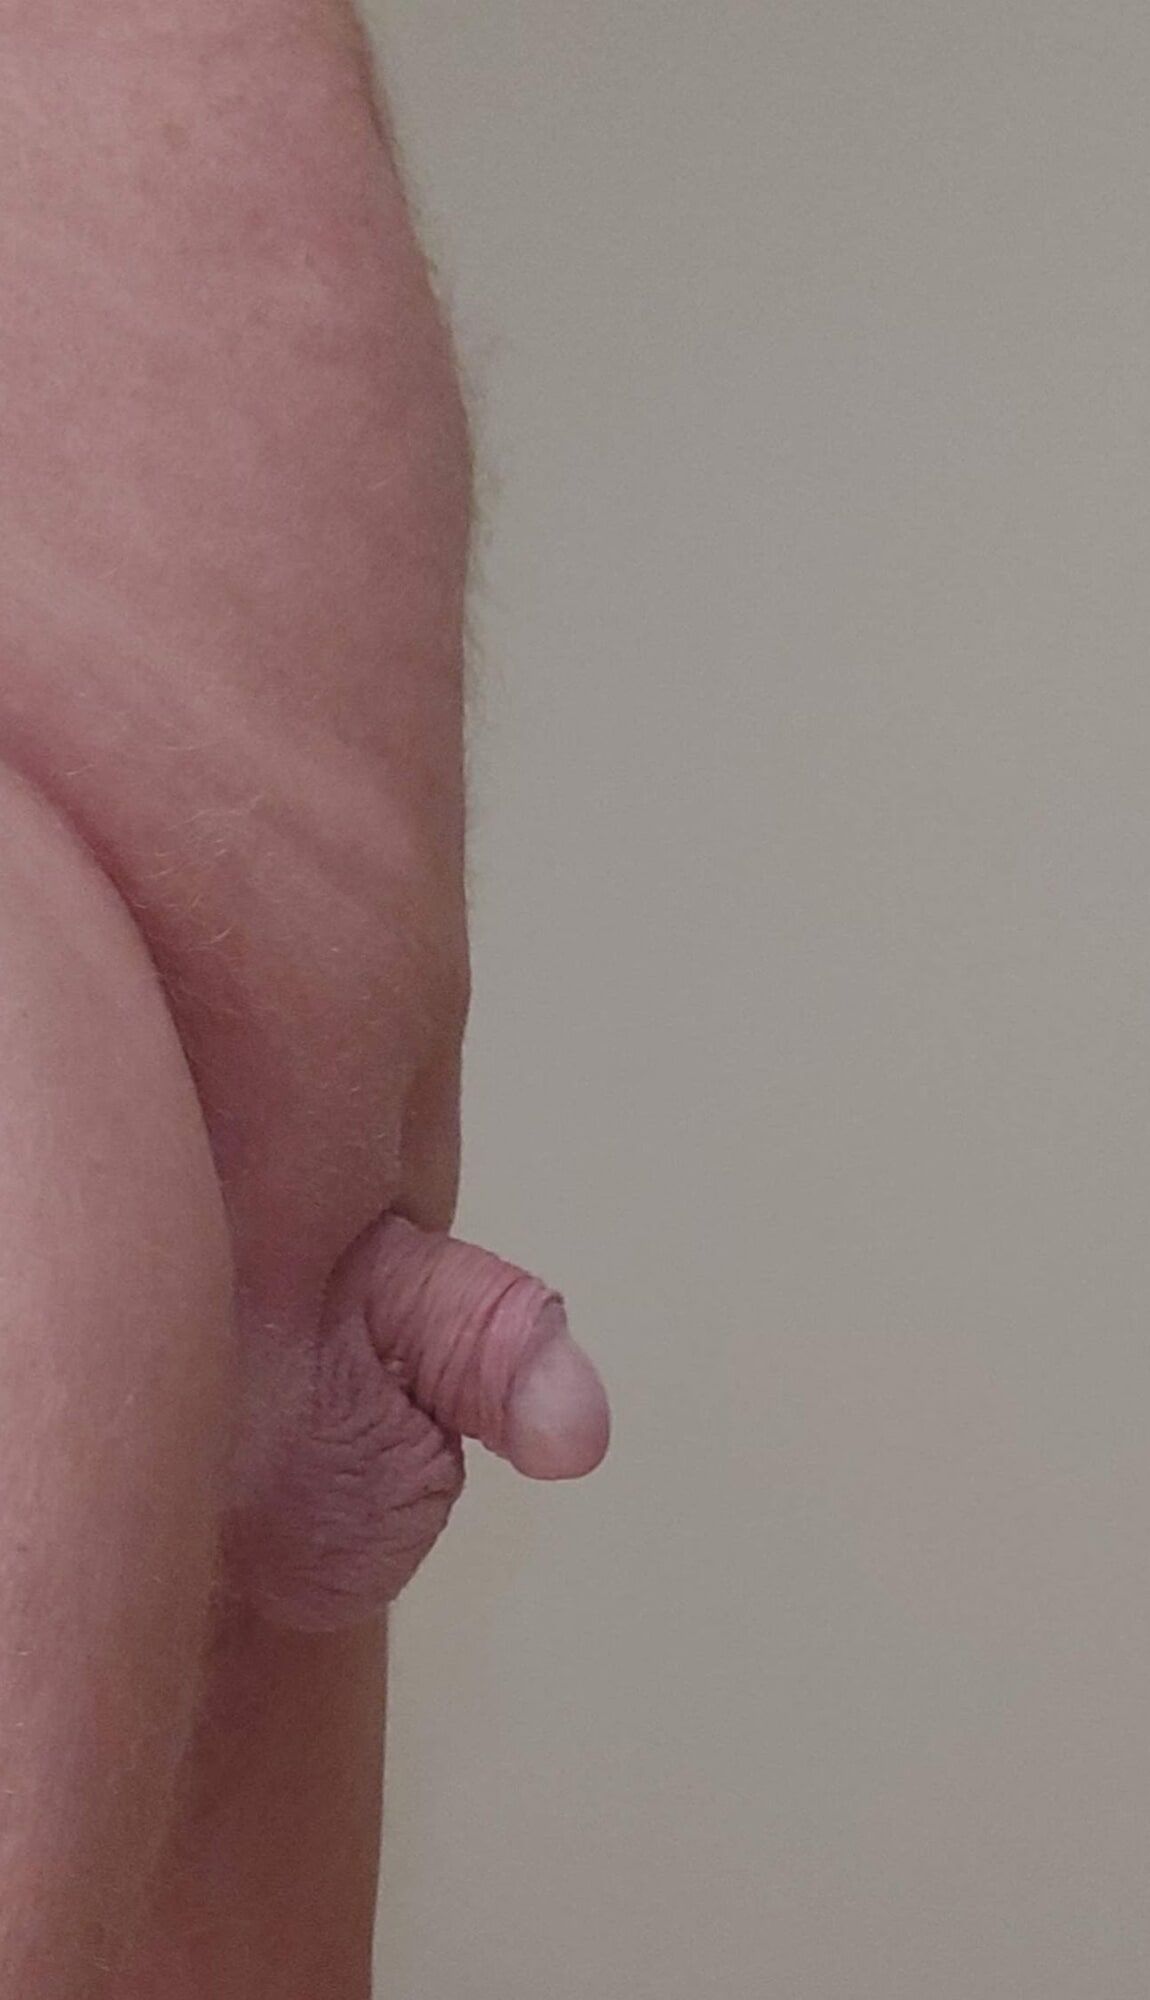 Uncut dick and ass #8